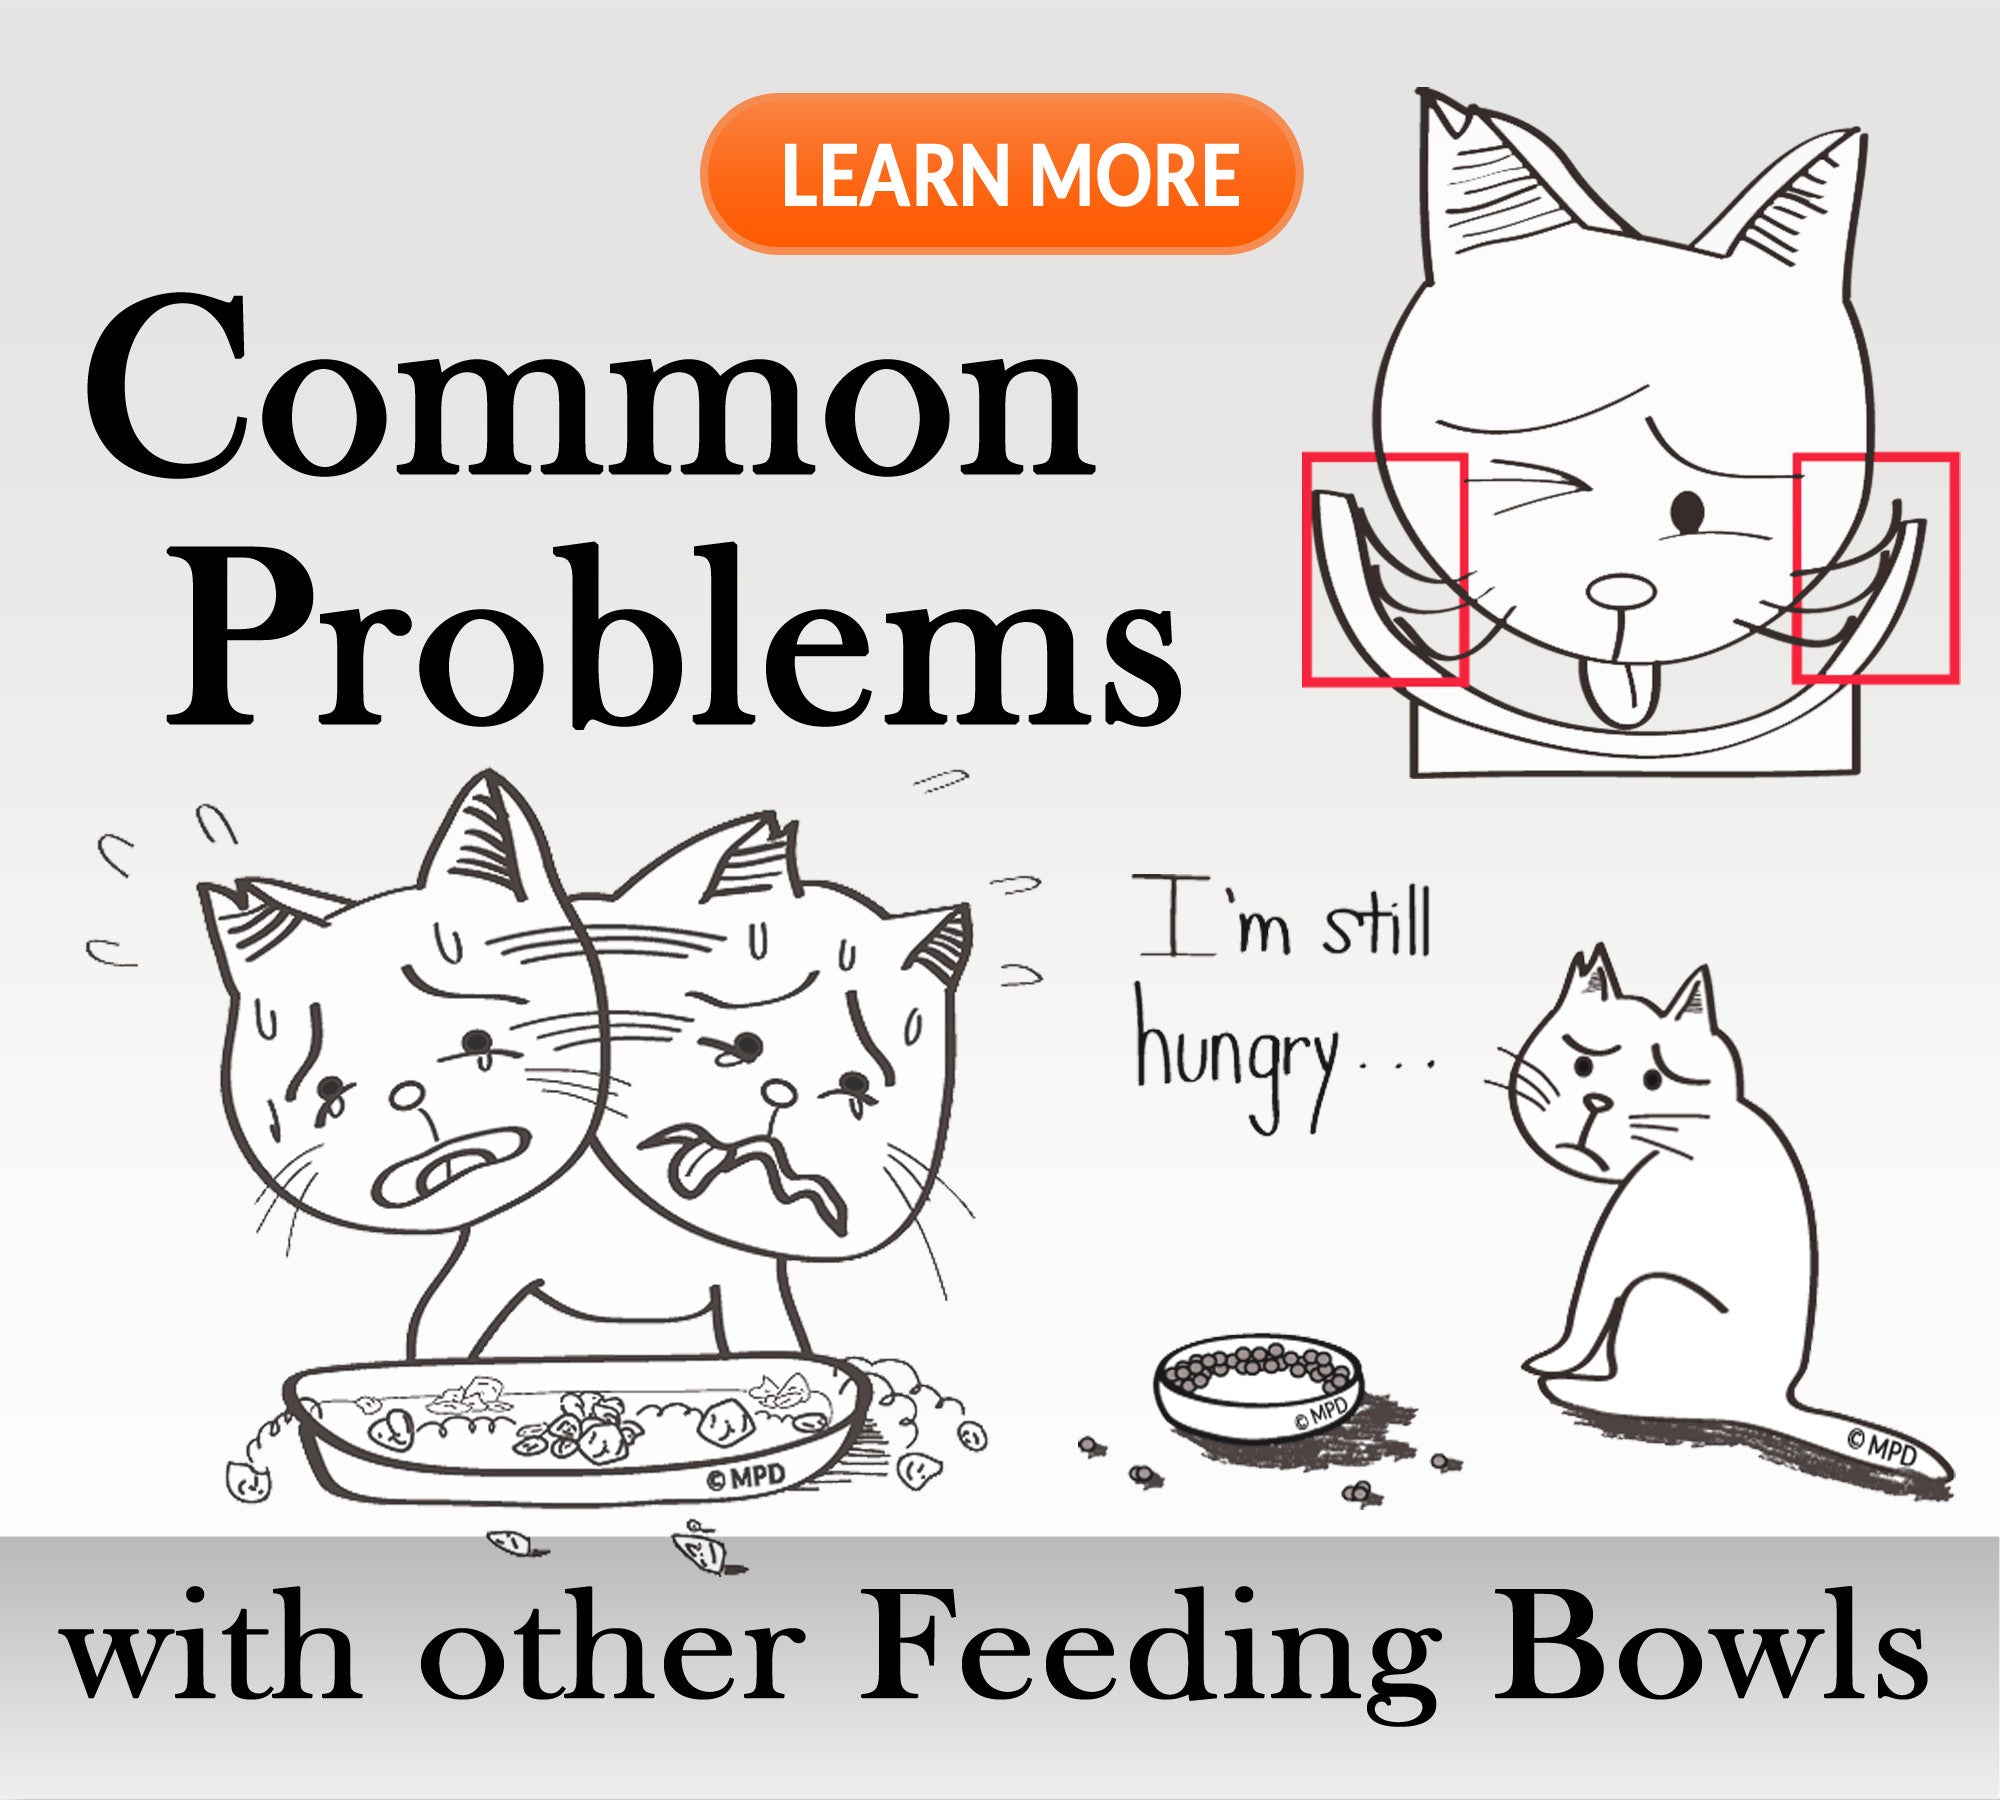 Common Problems with other feeding bowls